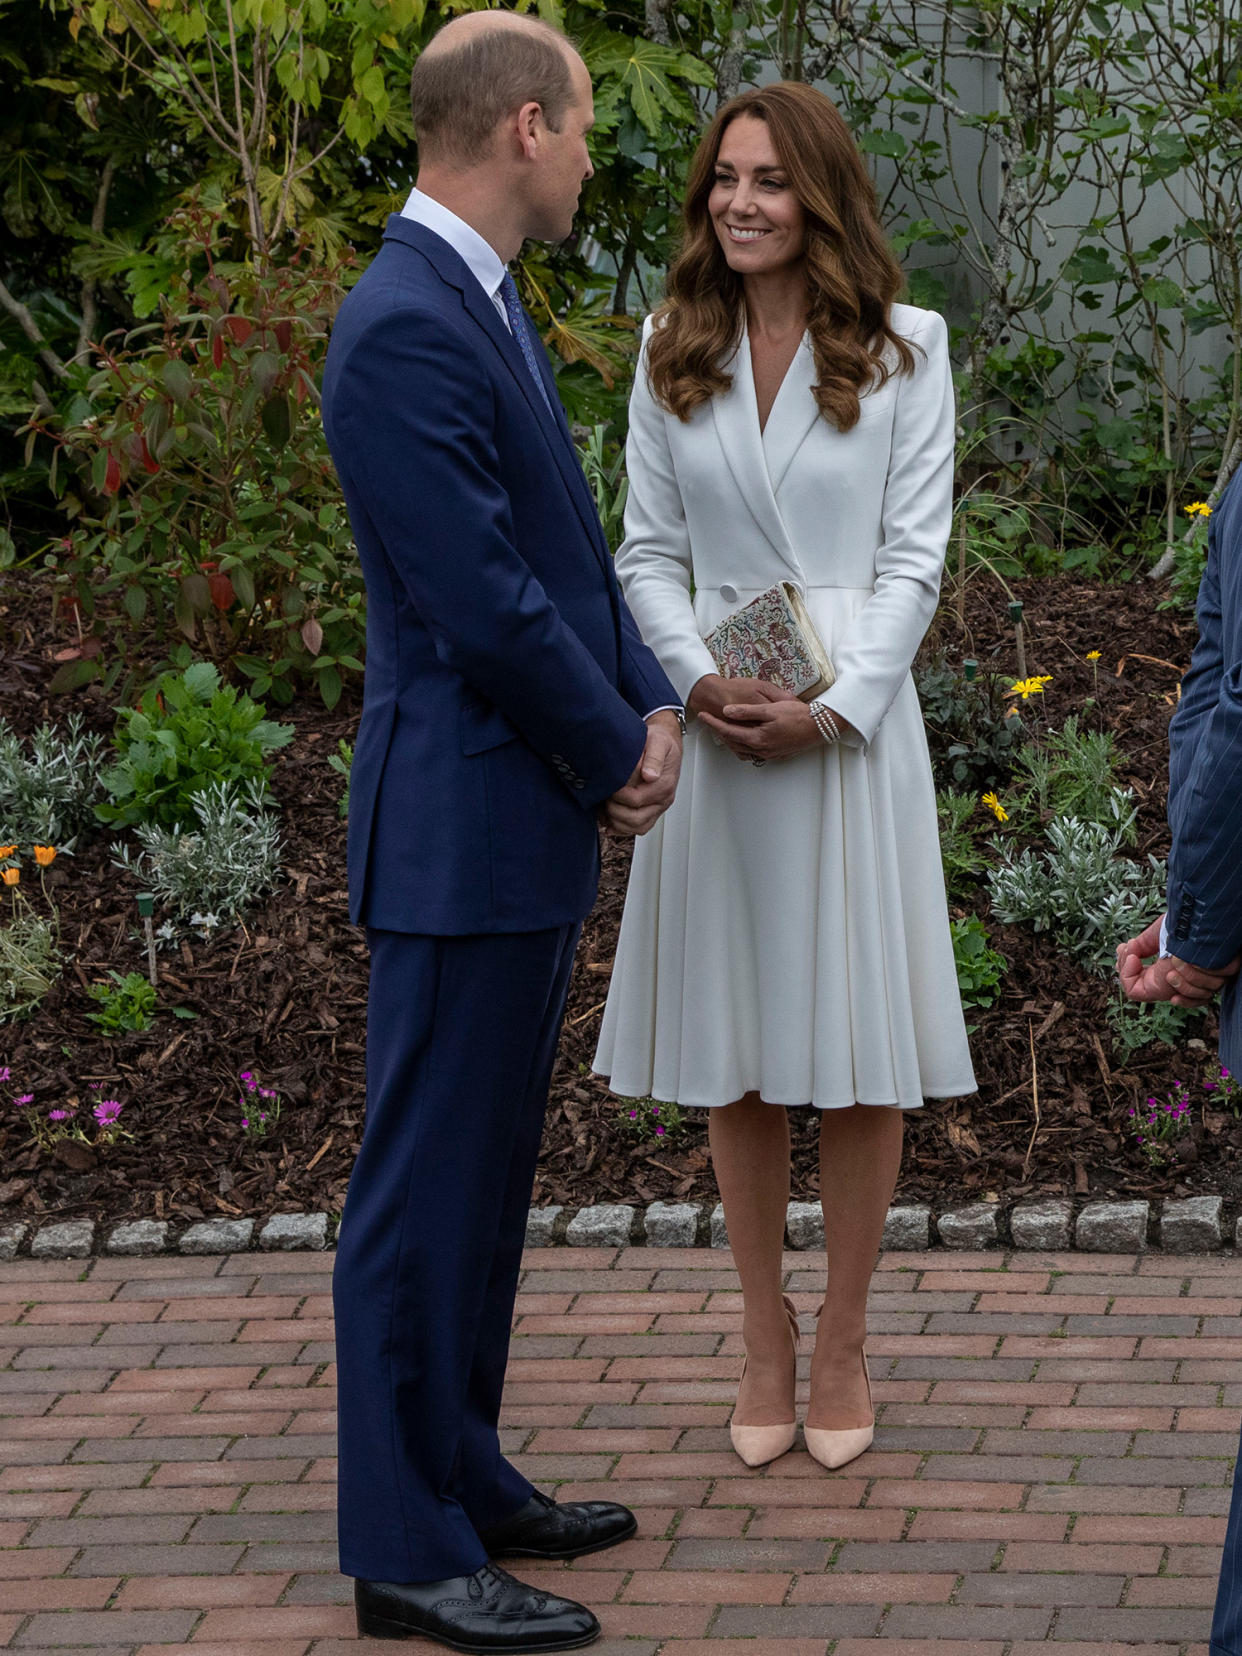 The Duchess of Cambridge first wore the Alexander McQueen dress to the G7 summit in 2021. (Getty Images)